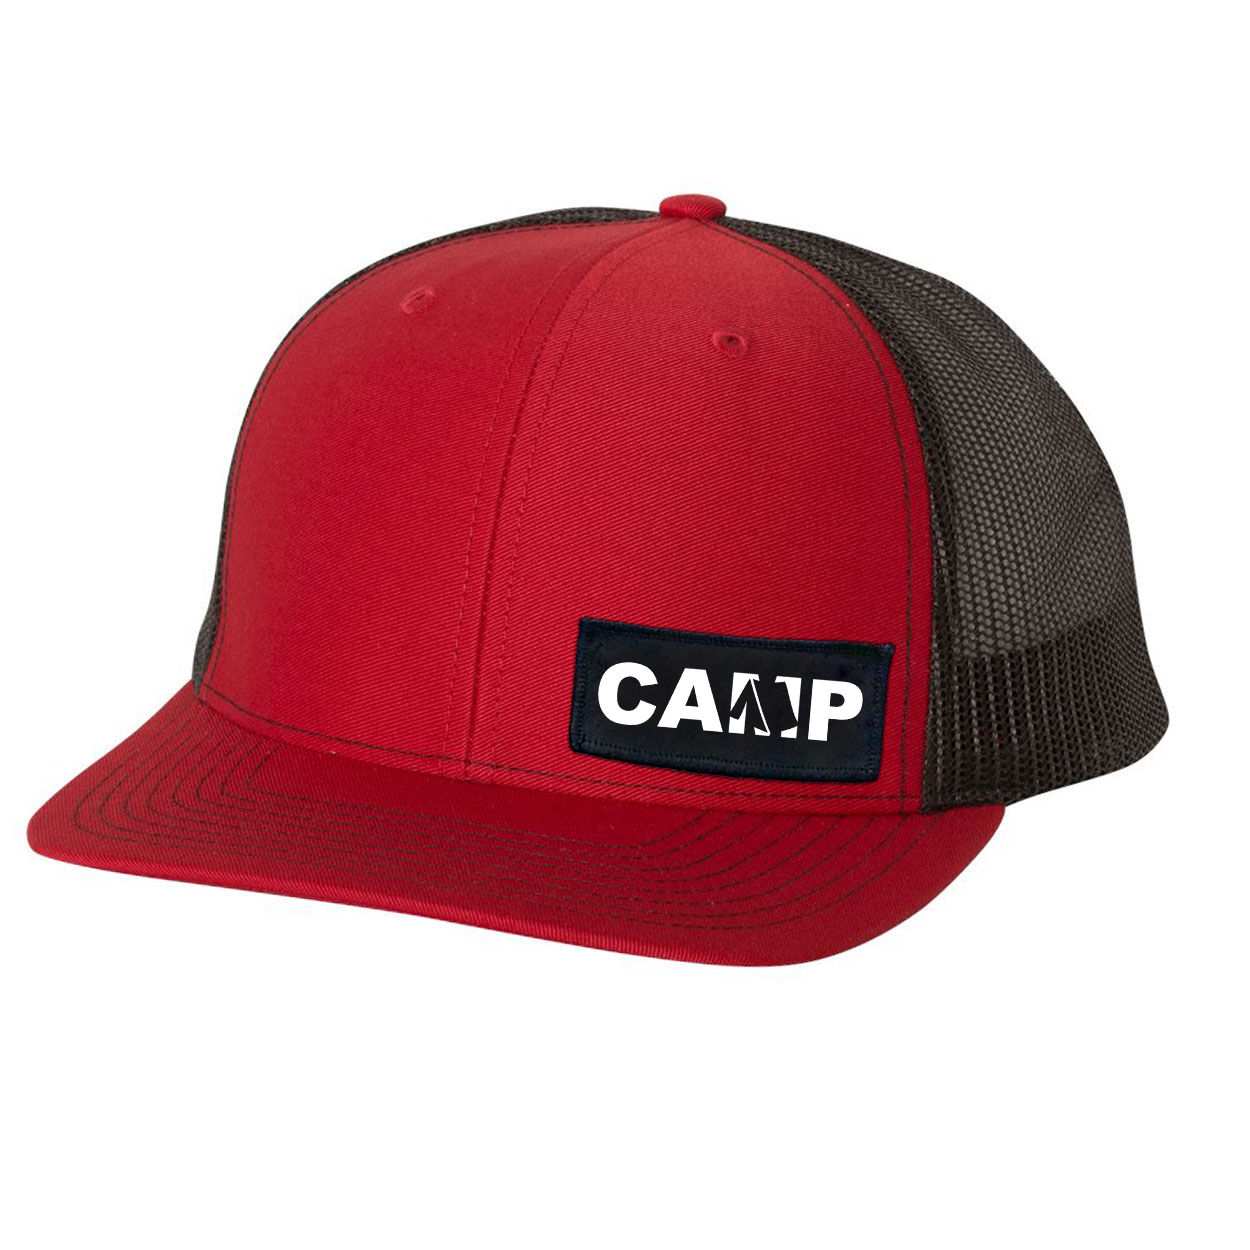 Camp Tent Logo Night Out Woven Patch Snapback Trucker Hat Red/Black 